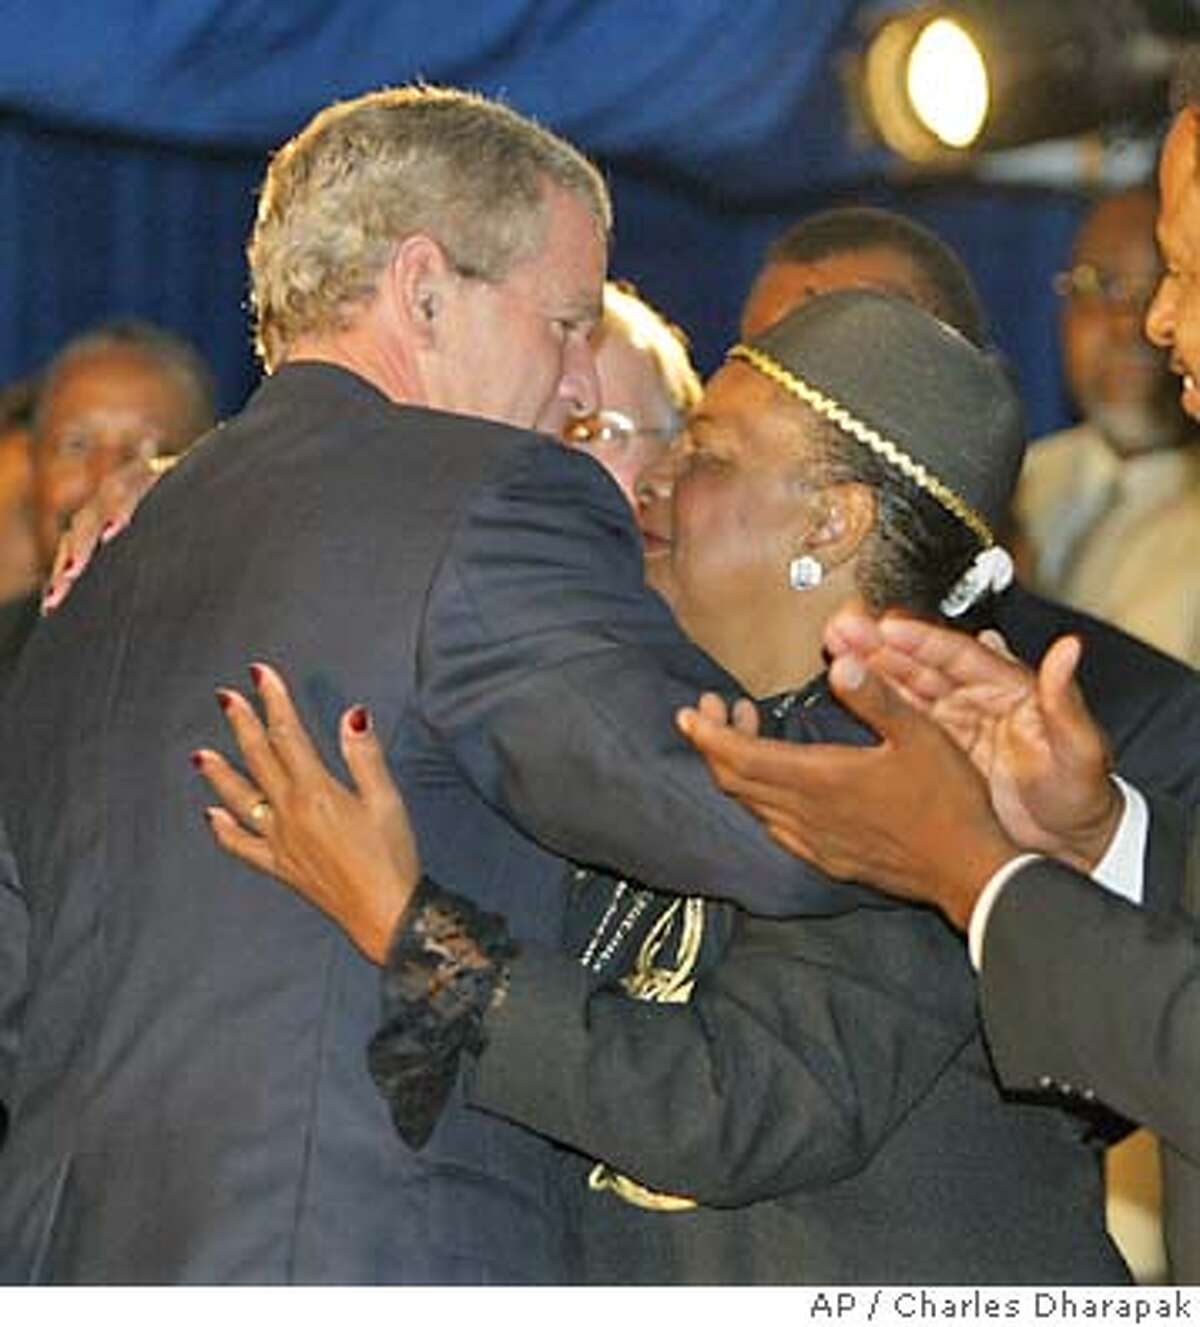 President Bush is embraced by Rev. Juanita Clark Wheeler of the God Cares Deliverance Church after Bush spoke about AIDS in Philadelphia Wednesday, June 23, 2004. (AP Photo/Charles Dharapak)